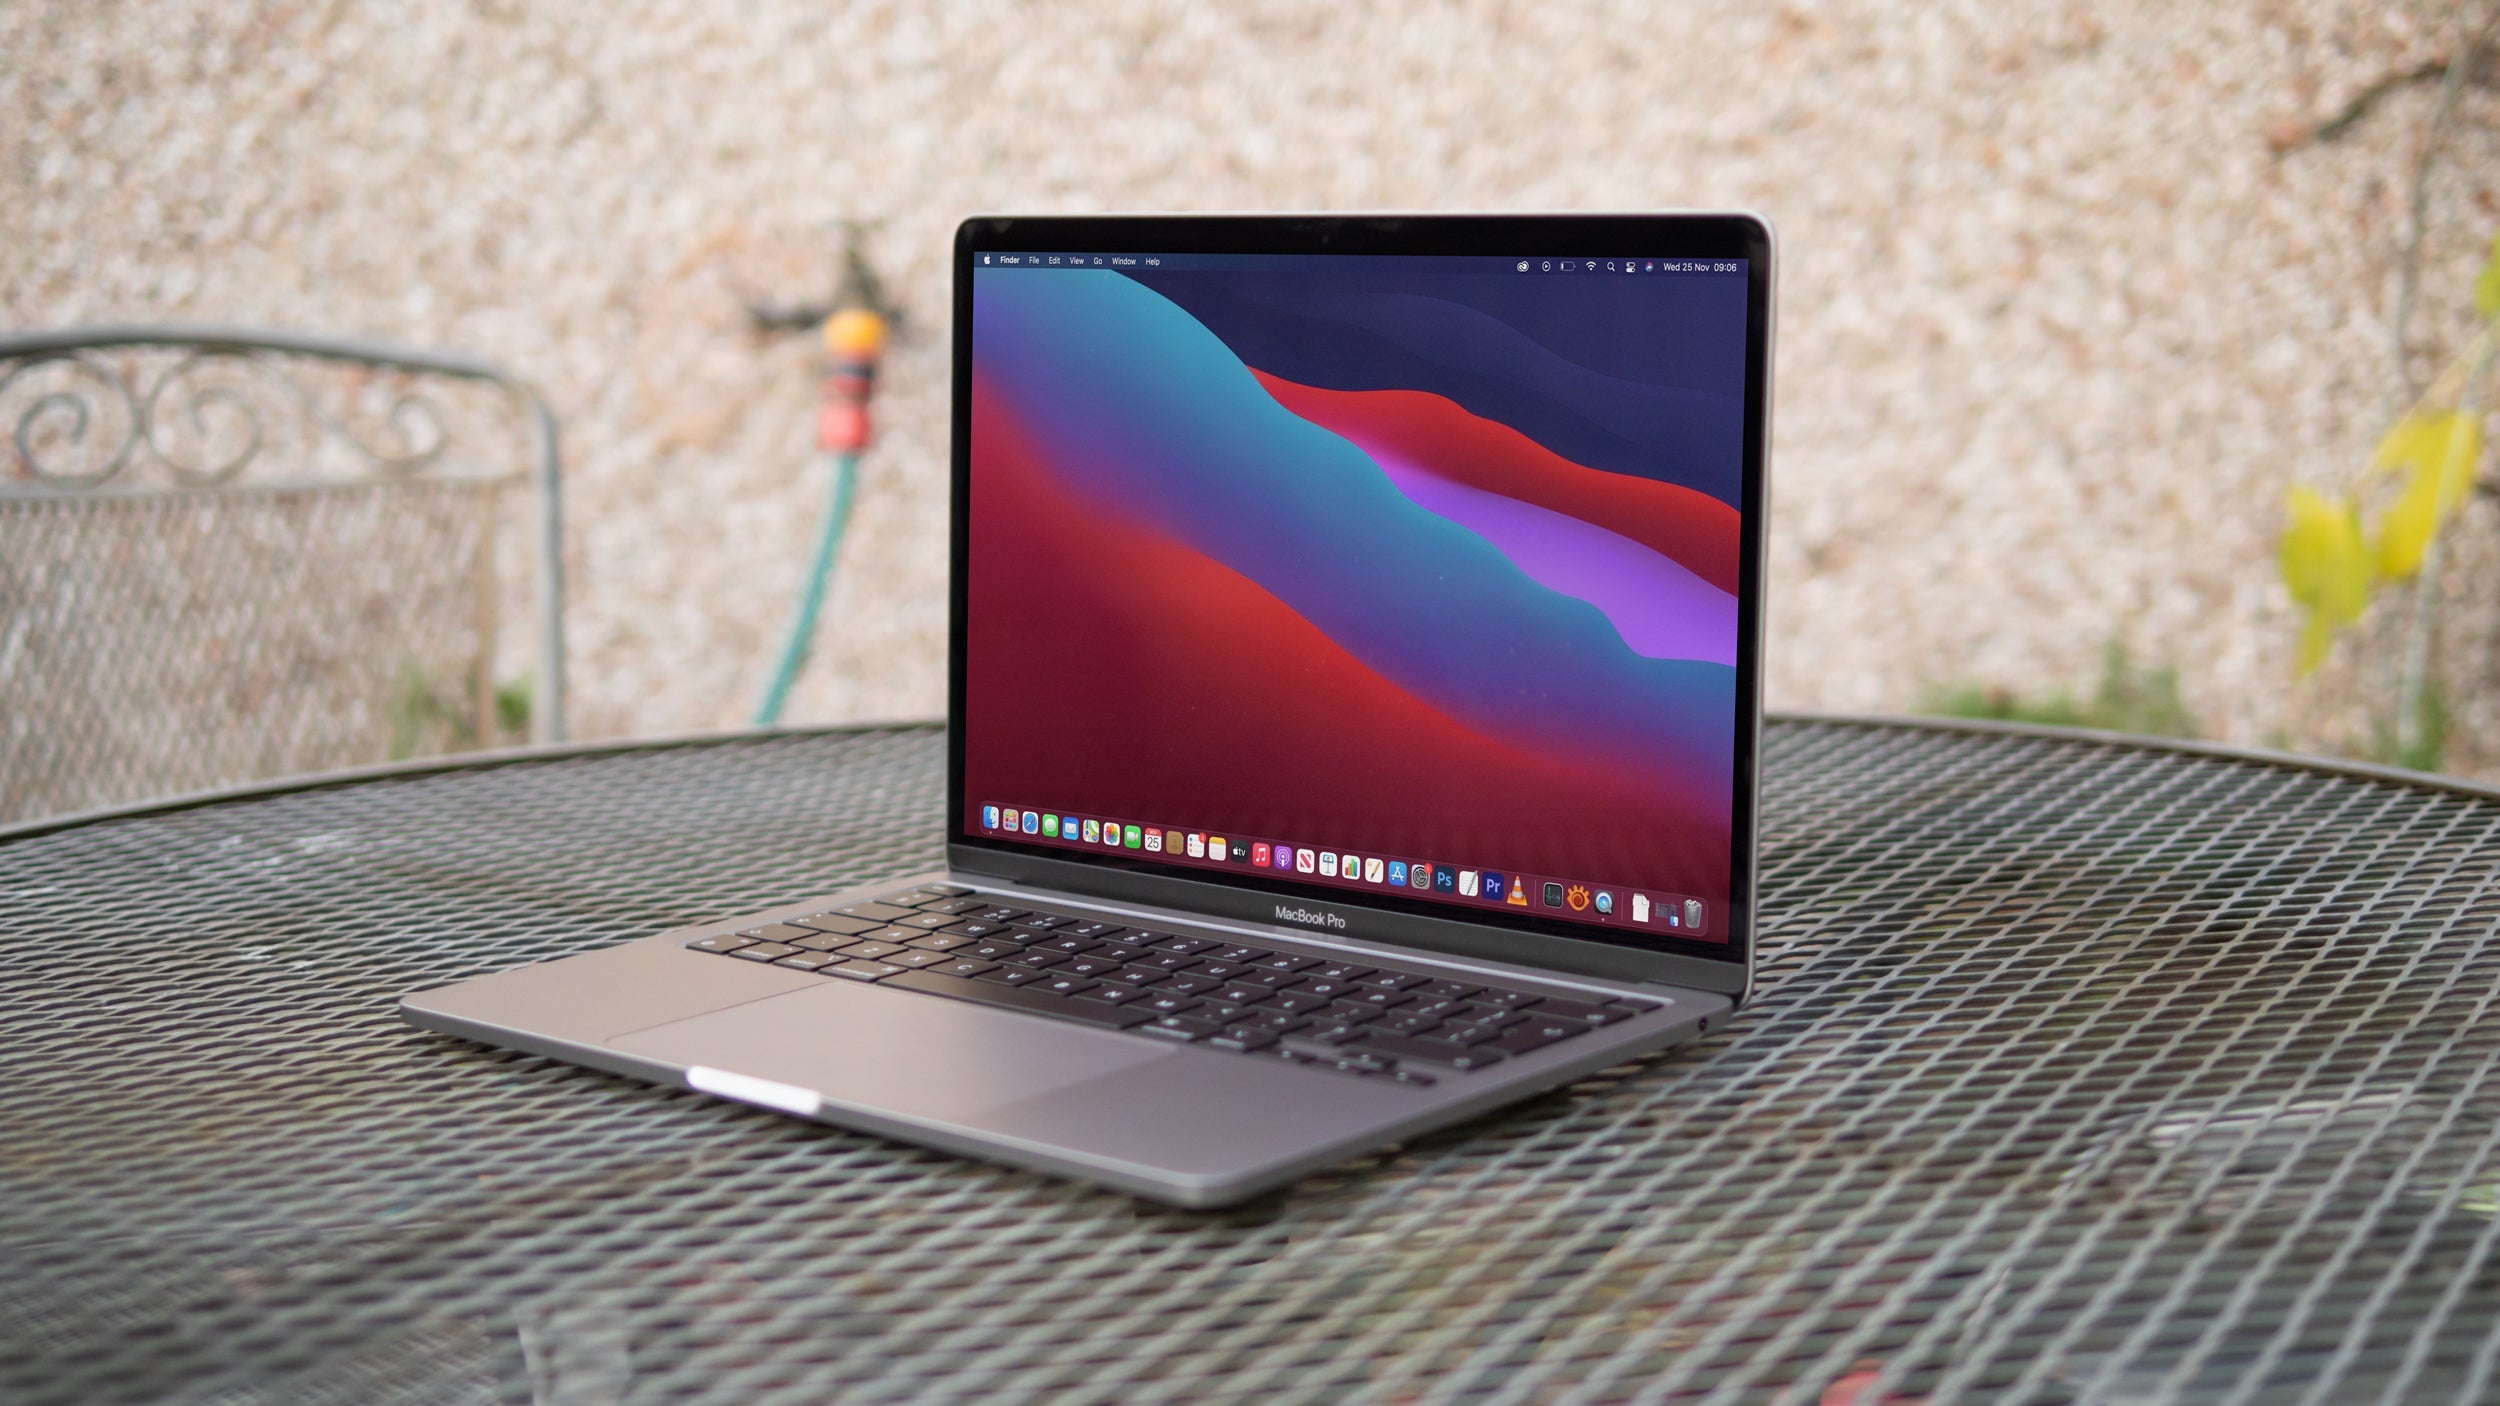 M1 Apple MacBook Pro 13in (2020) review: This laptop will change